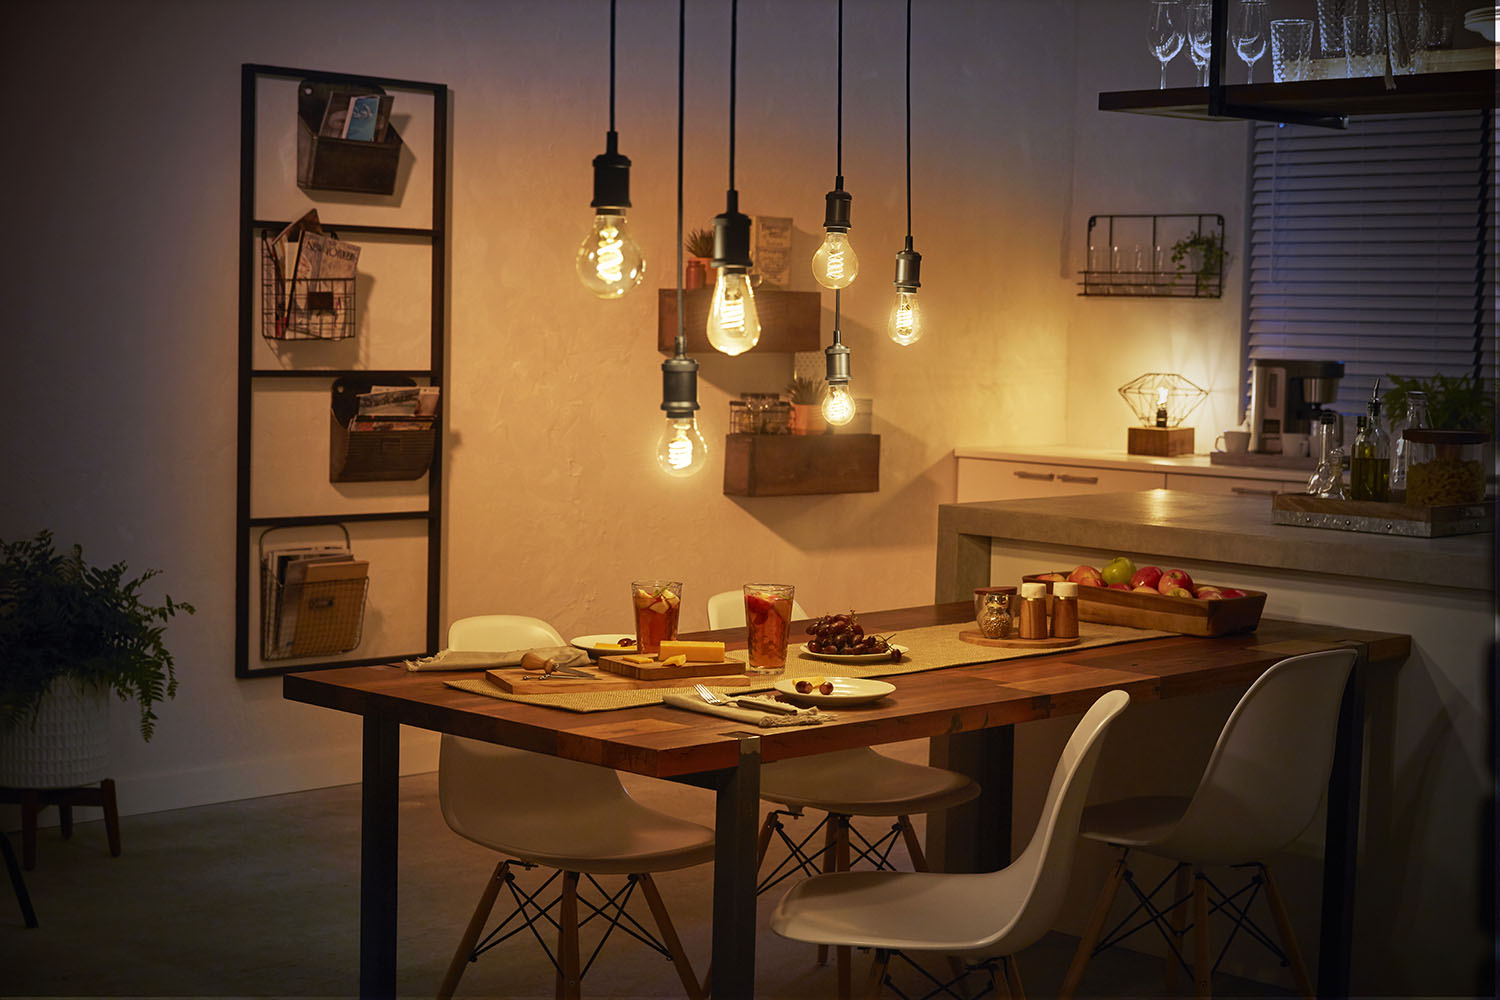 Hue Lights to Add Bluetooth Connectivity, Filament Bulb Options | Digital Trends